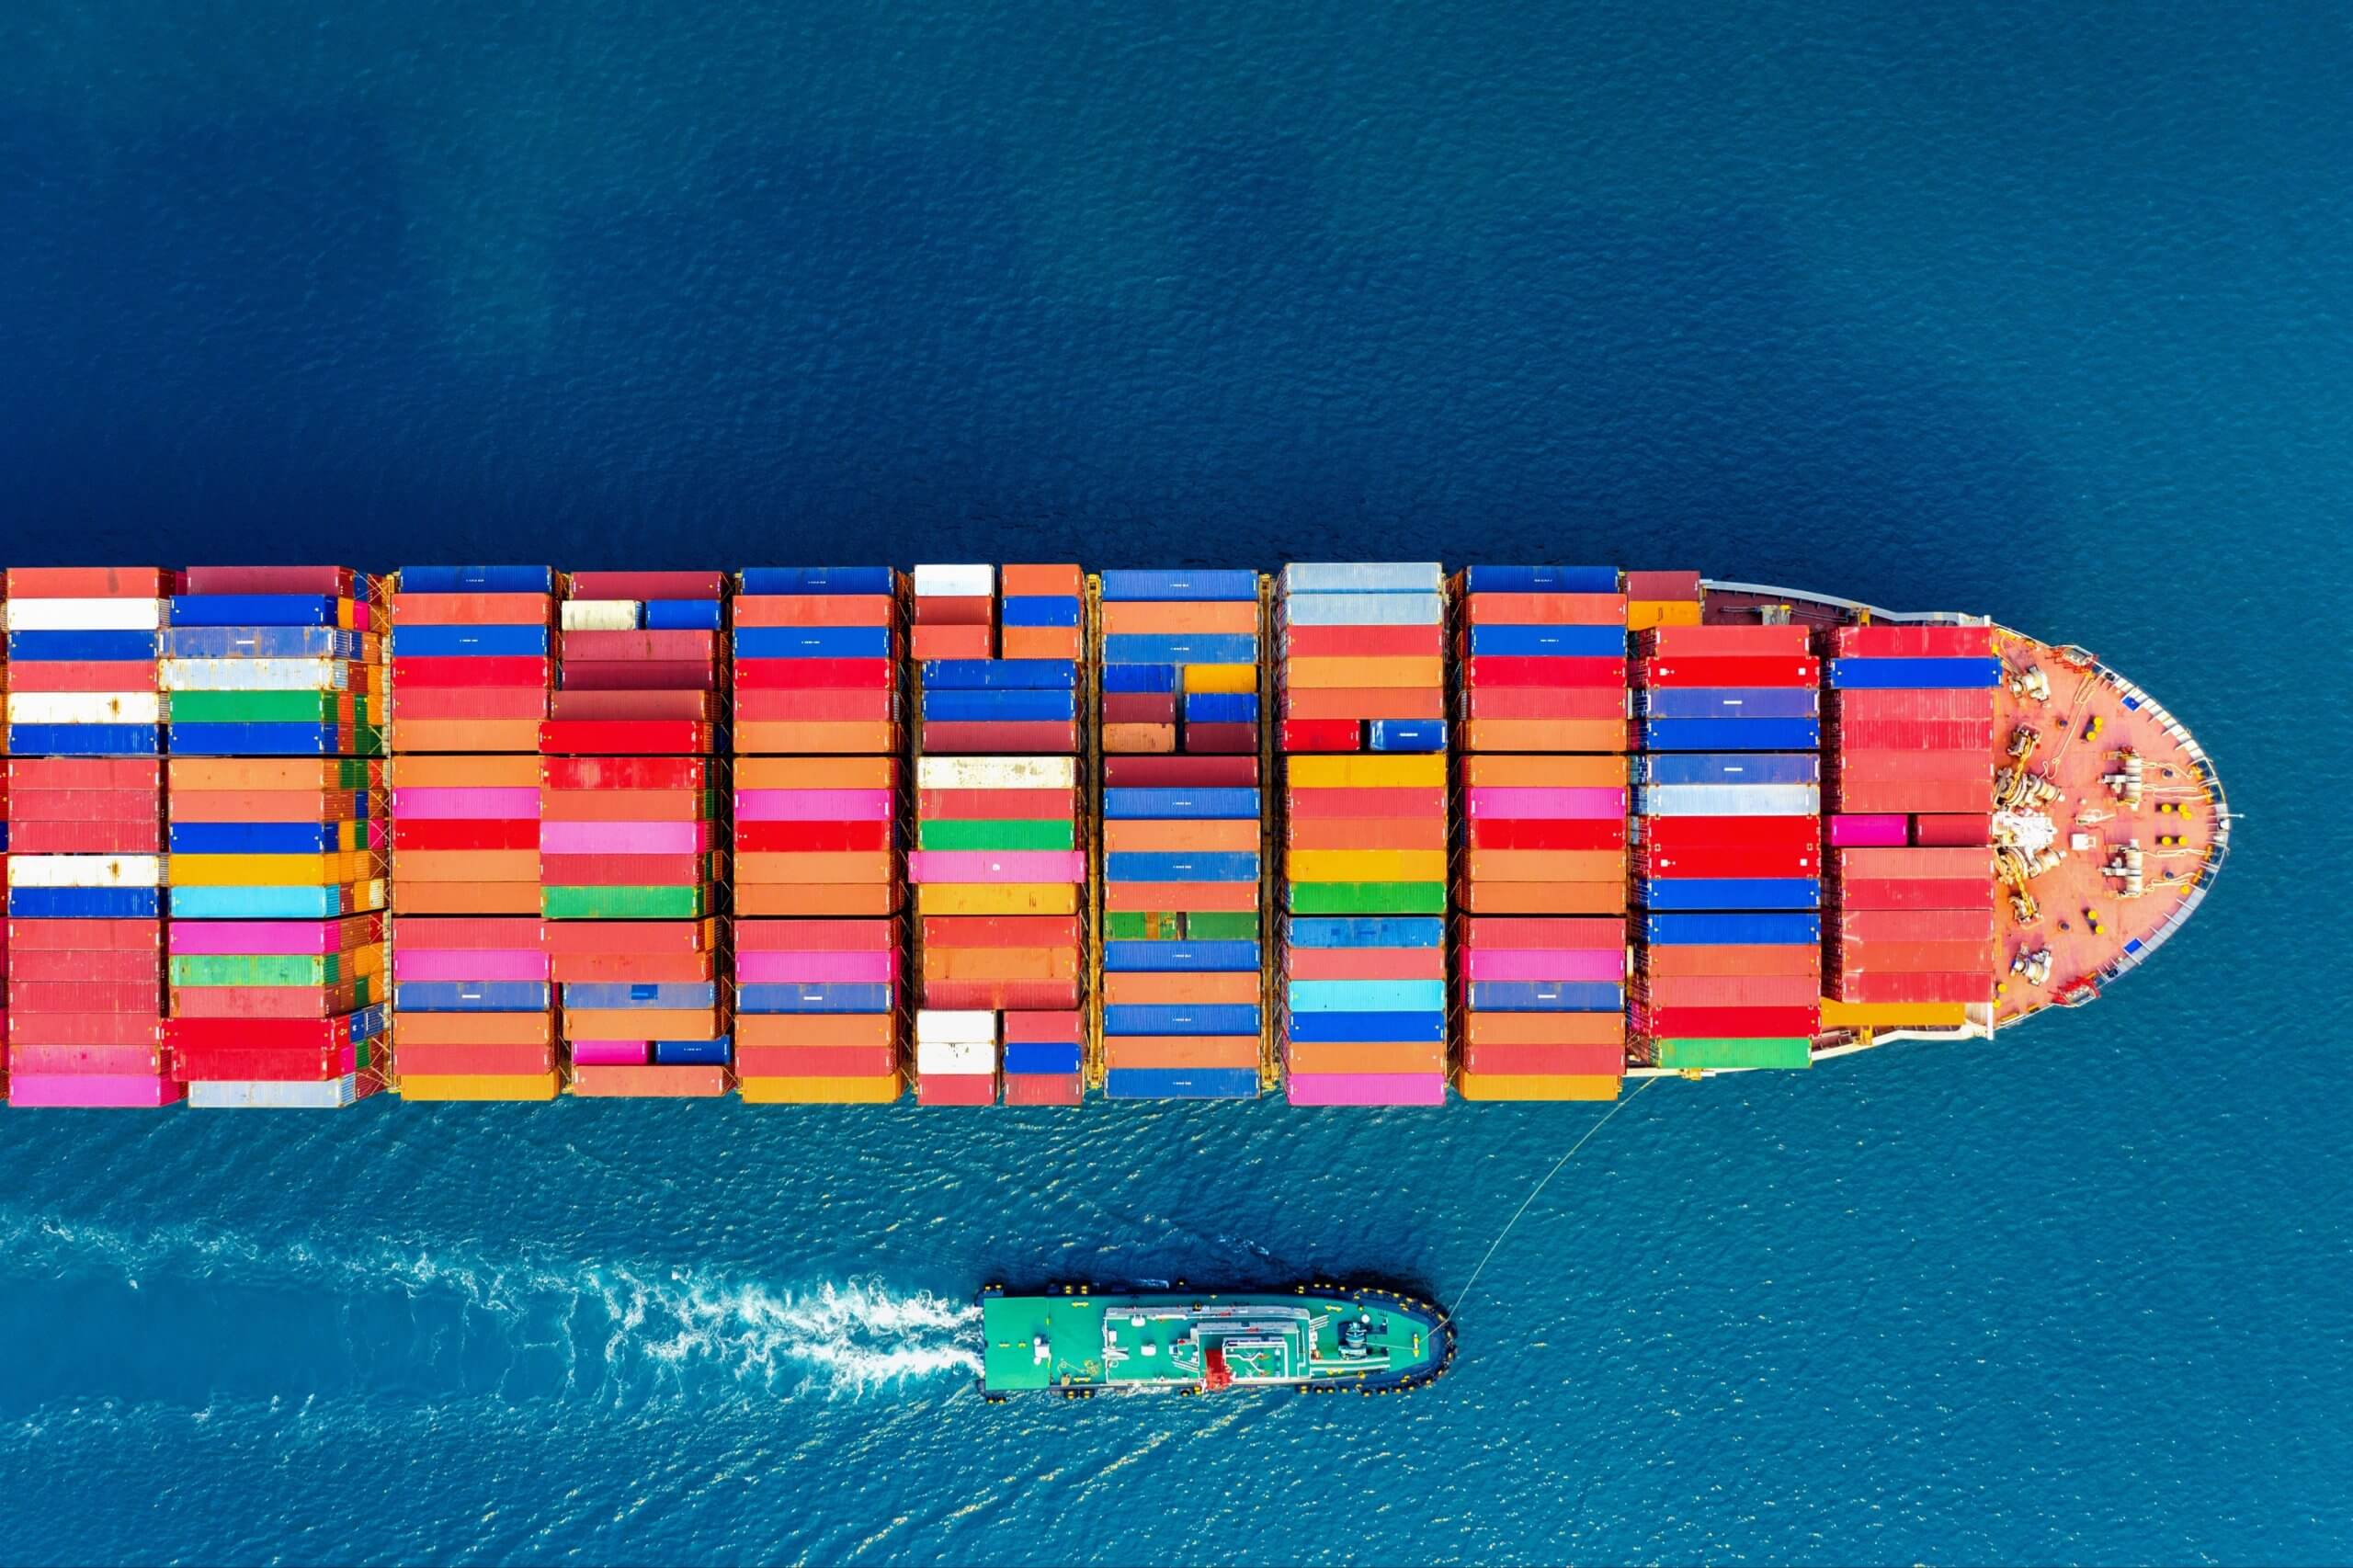 Aerial view of a freight ship carrying colourful cargo containers sails over blue waters, alongside a smaller green pilot ship.